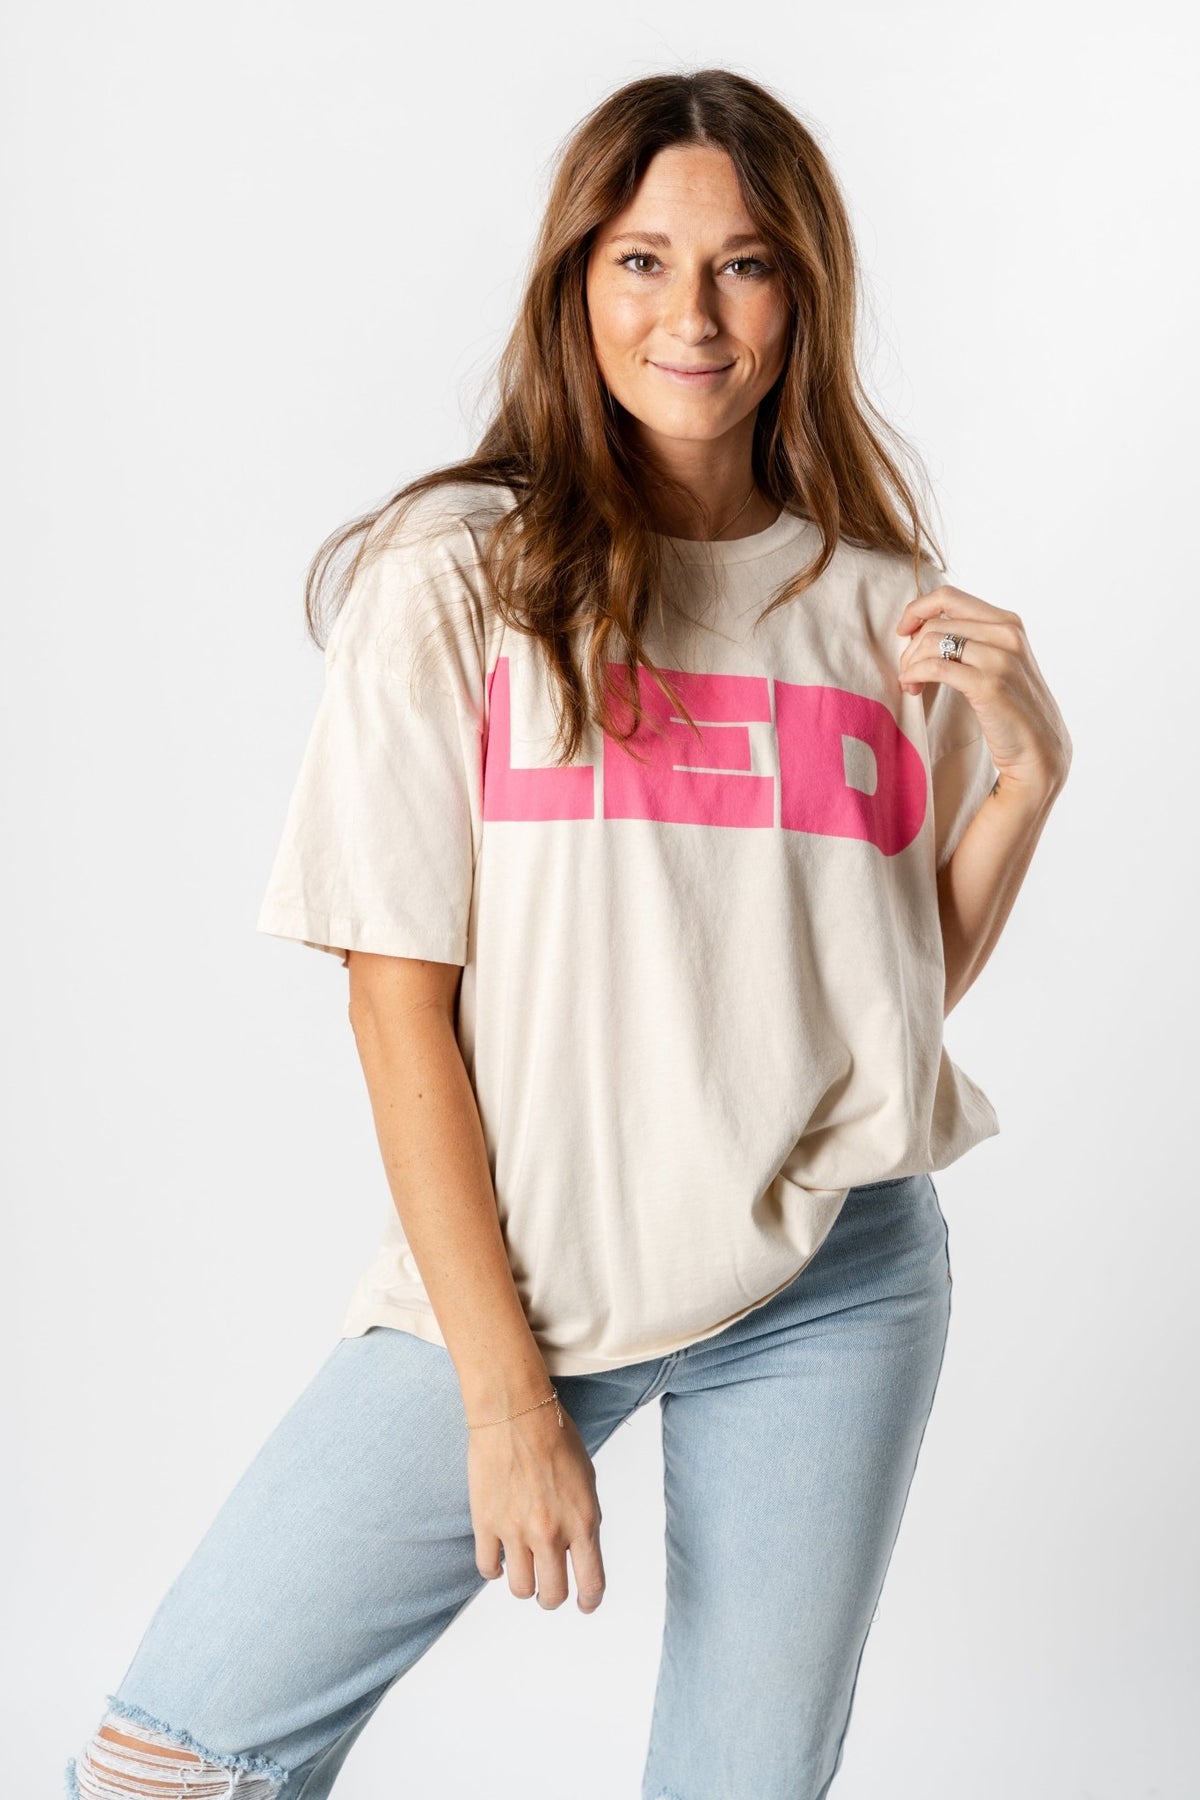 DayDreamer Led Zeppelin merch oversized tee dirty white - DayDreamer Graphic Band Tees at Lush Fashion Lounge Trendy Boutique in Oklahoma City